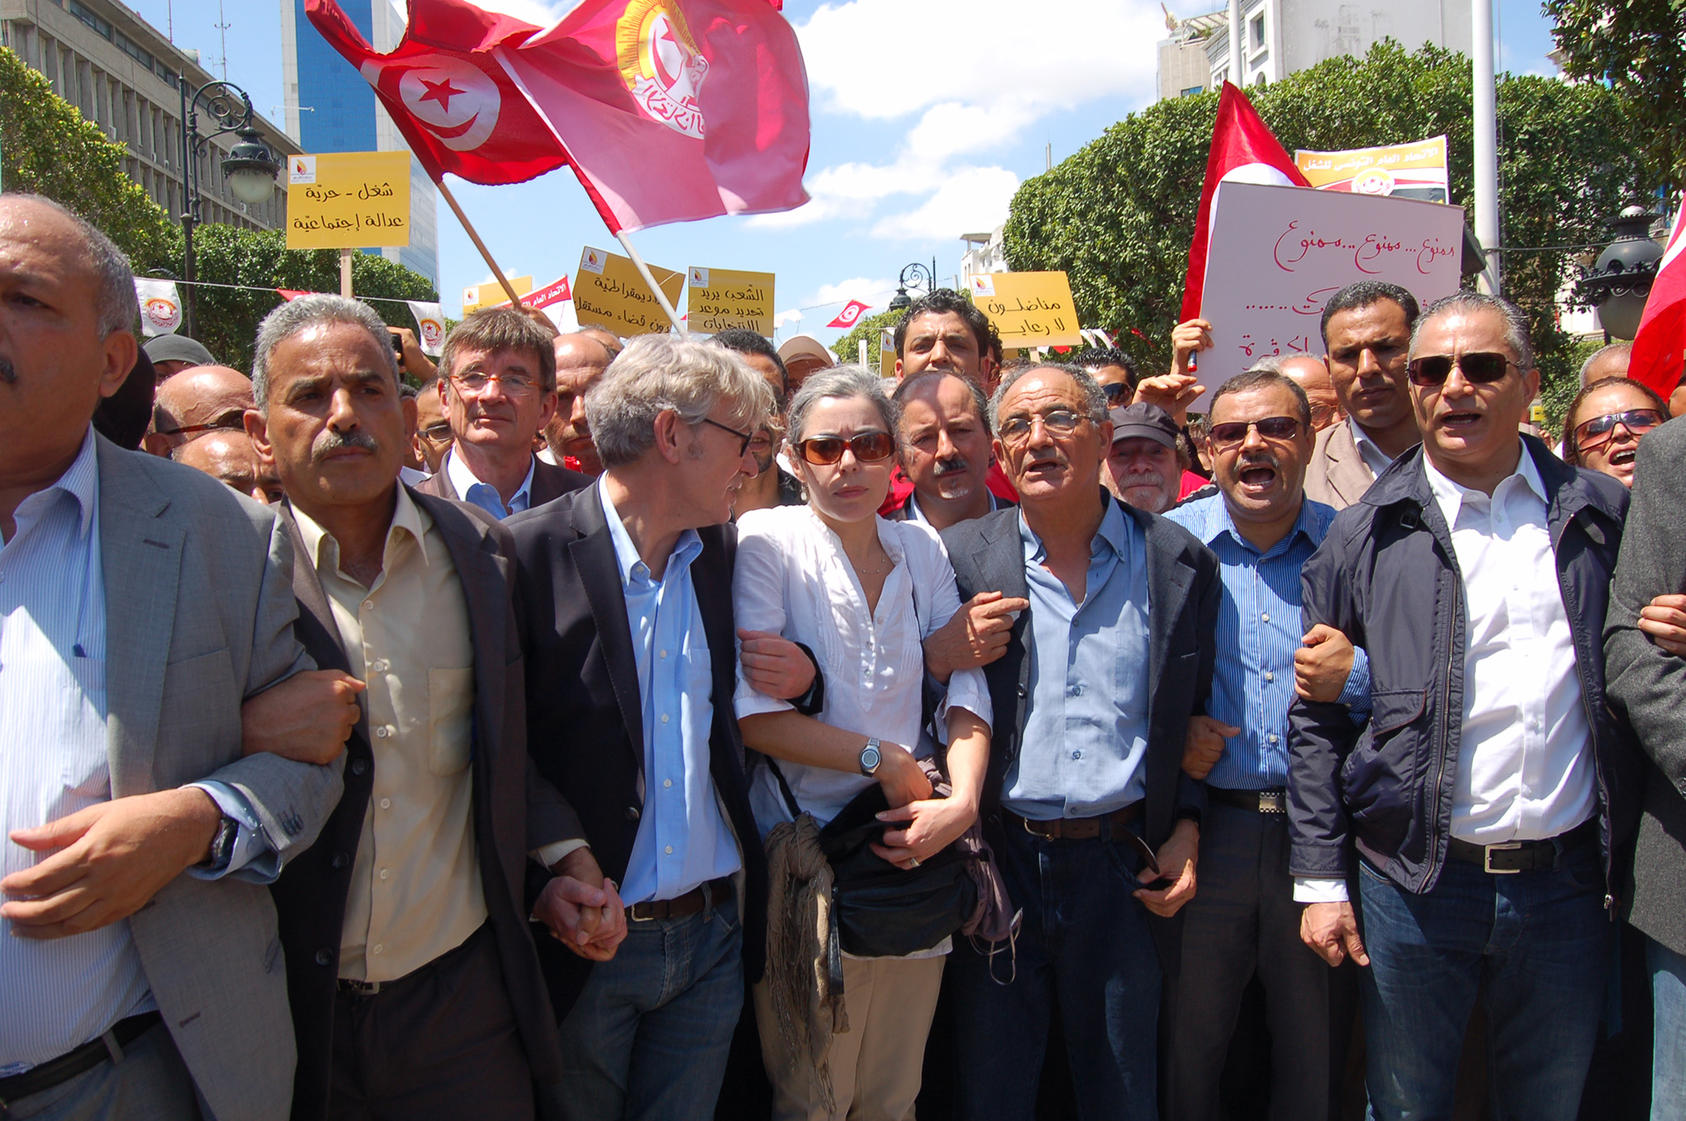 Trade union leaders at a protest in Tunis, Tunisia, May 12, 2012 (scossargilbert/Flickr)